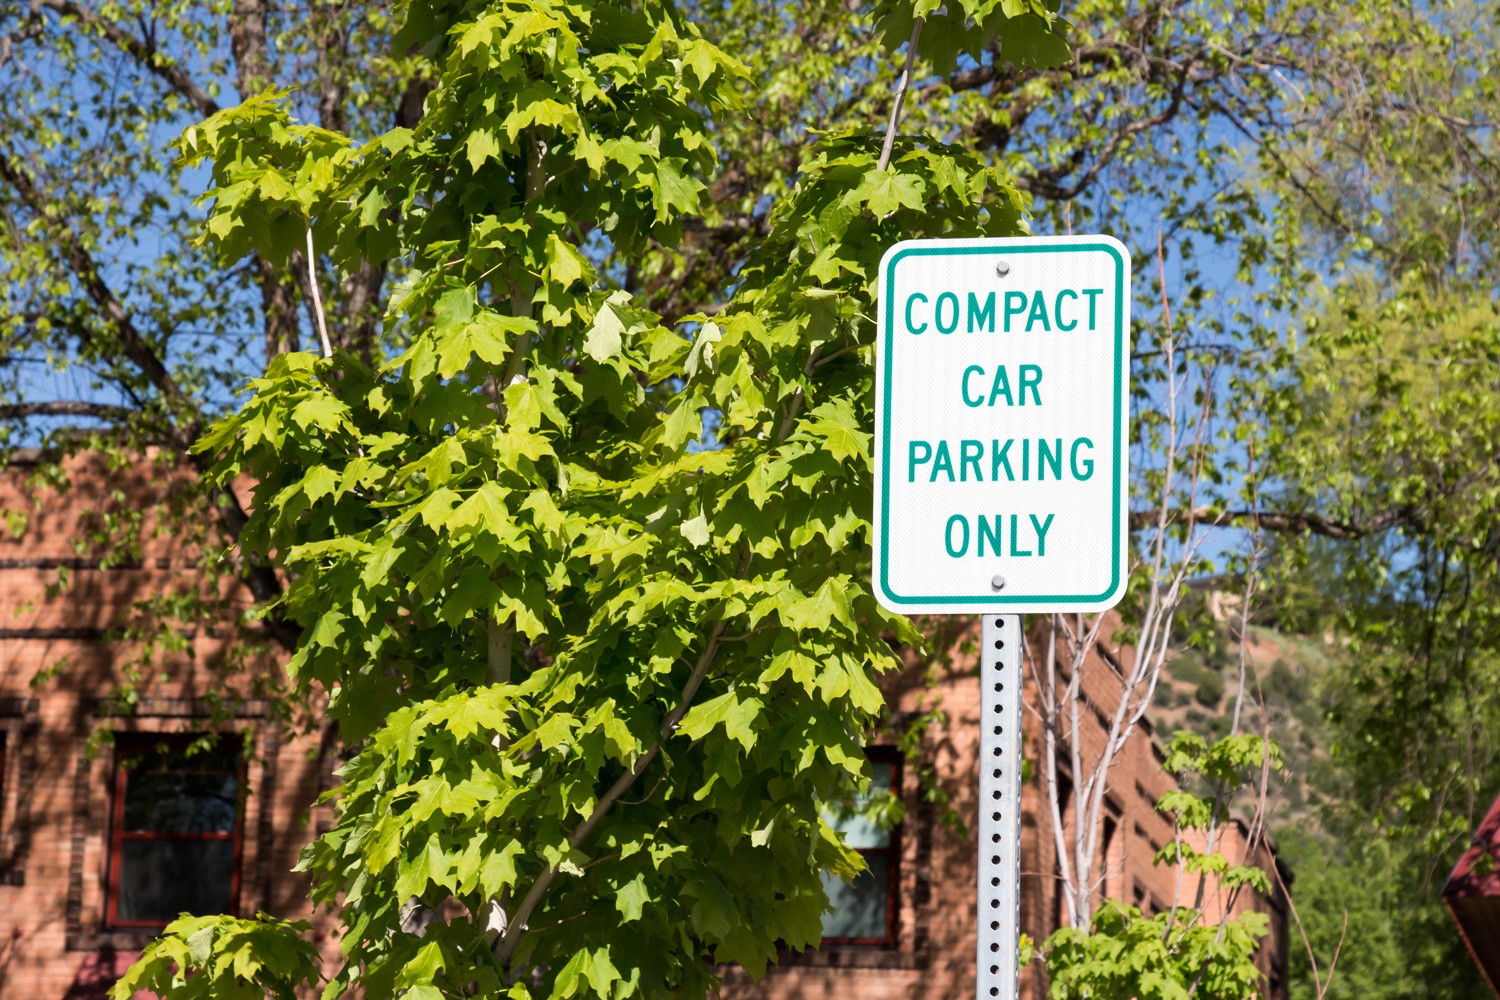 Compact car parking only sign with trees and a brick building